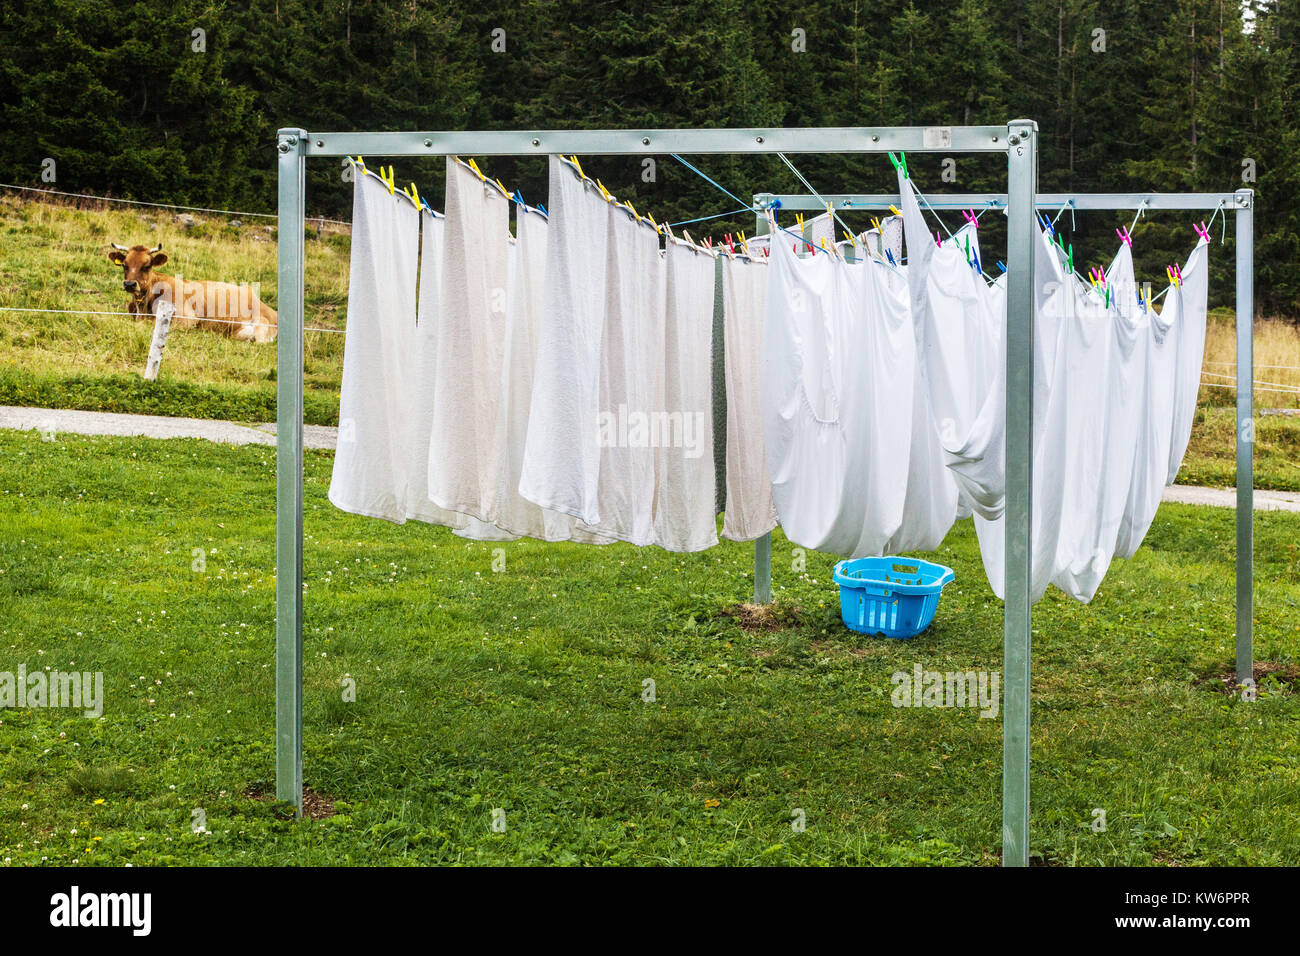 Laundry drying on clothesline cow lying in meadow Laundry hanging on a washing line Drying laundry Fresh Air Sheets Exterior Rural Scene View Stock Photo